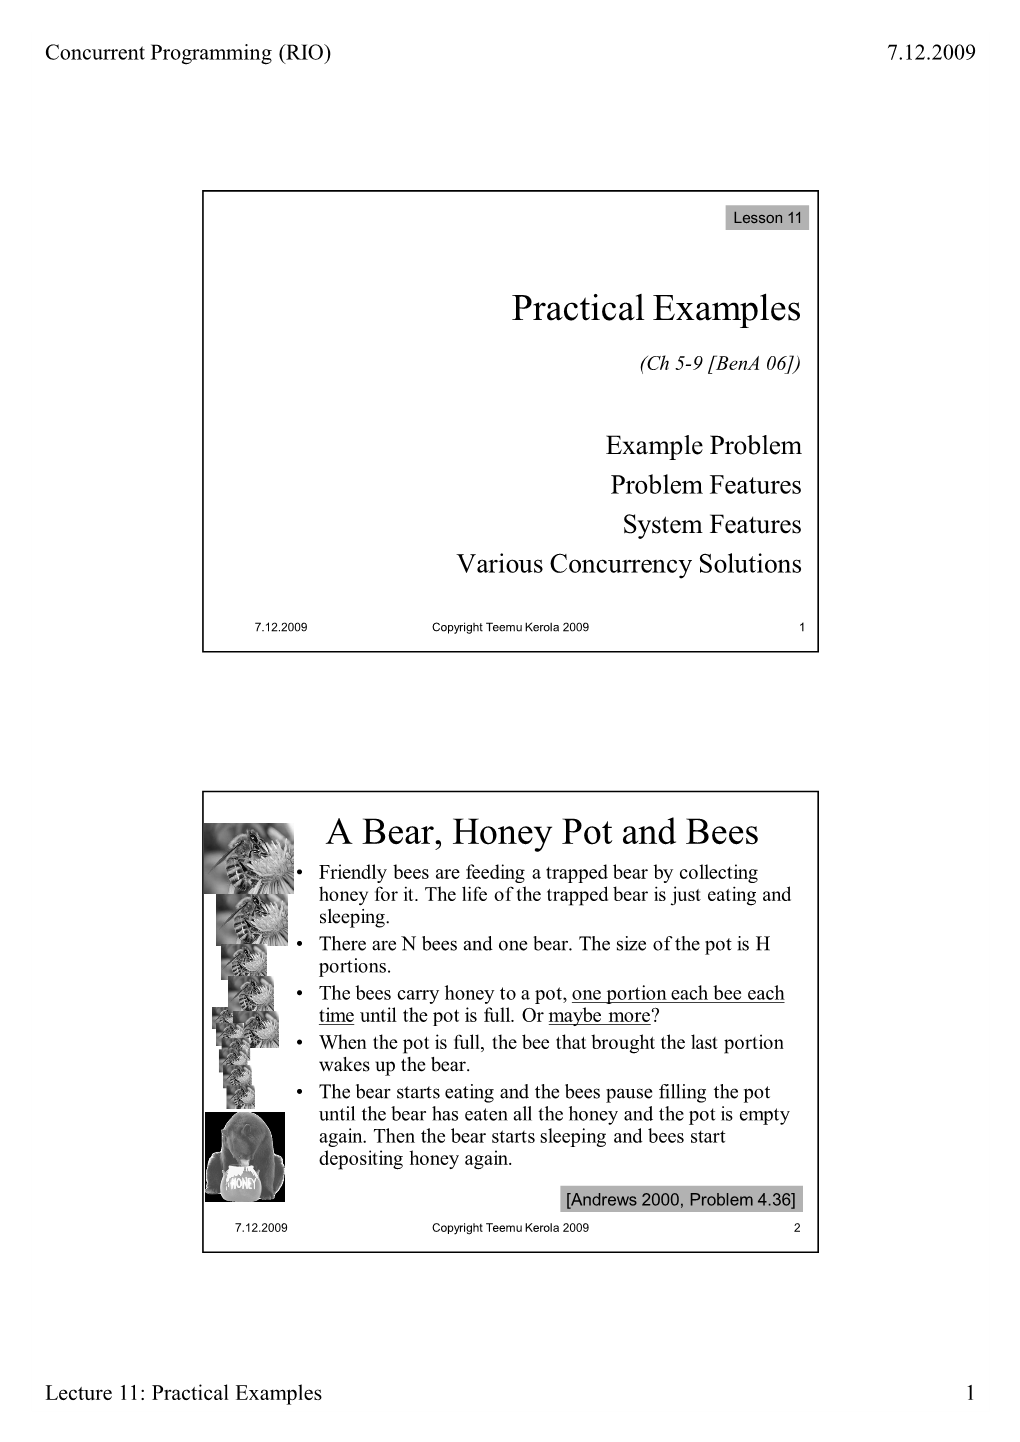 Practical Examples a Bear, Honey Pot and Bees